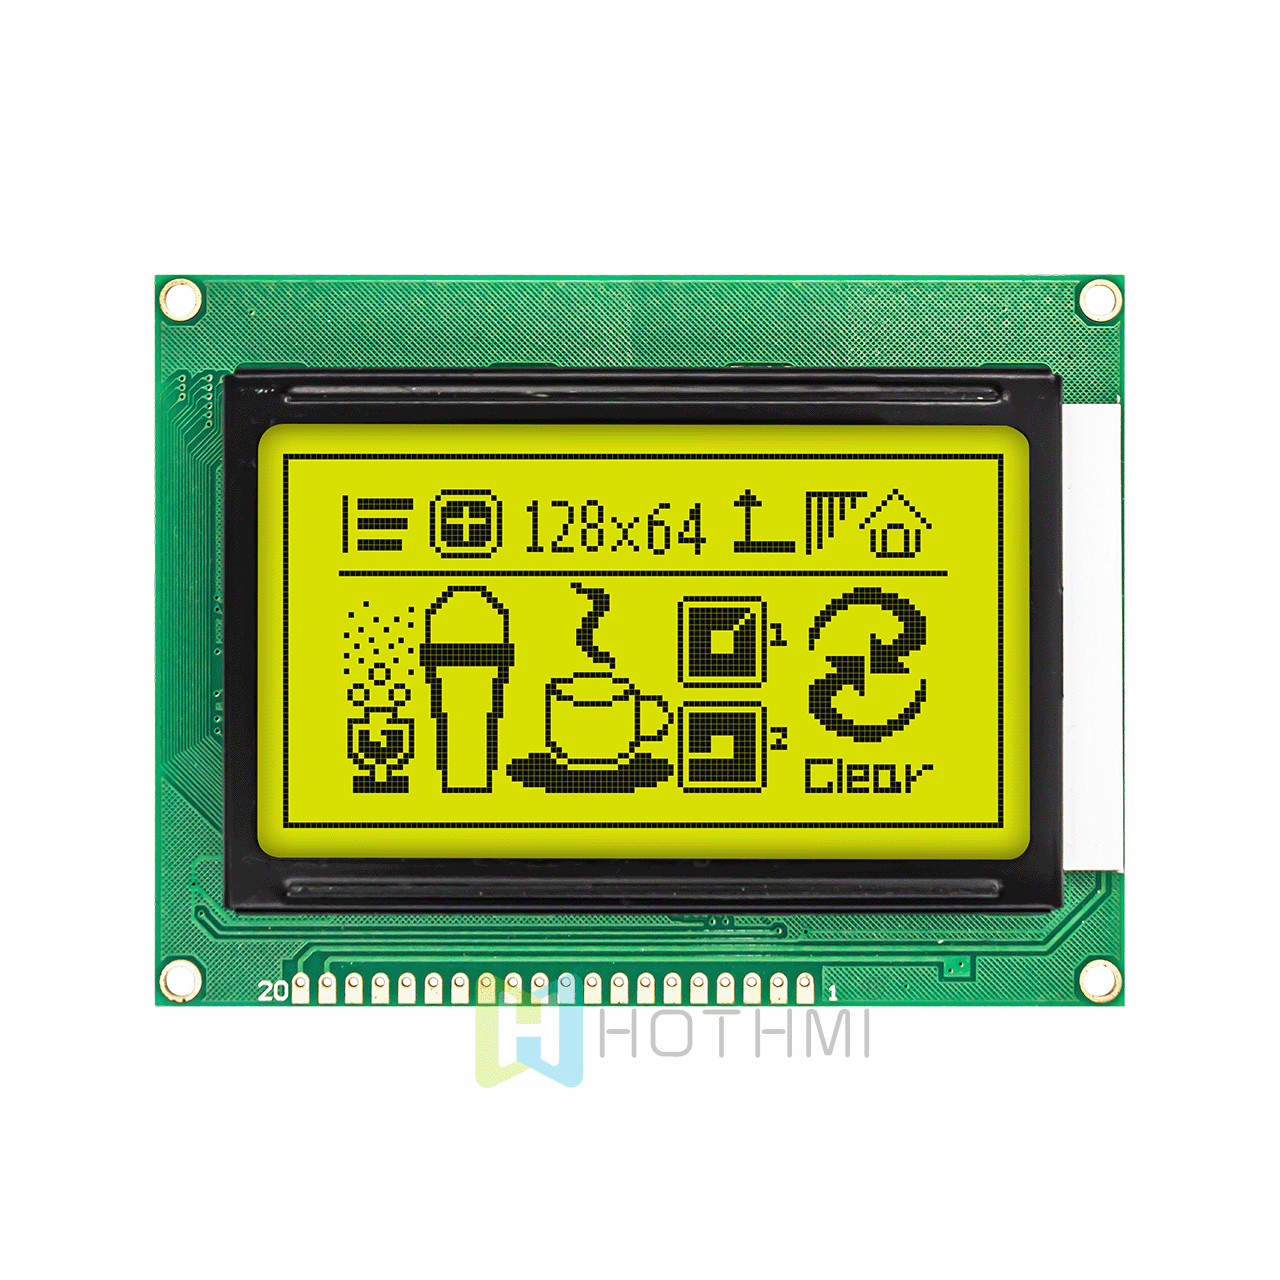 3.2-inch low-price 128x64 yellow-green backlight graphic LCD module | Graphic COB module | Supports 3.3V/5V at the same time